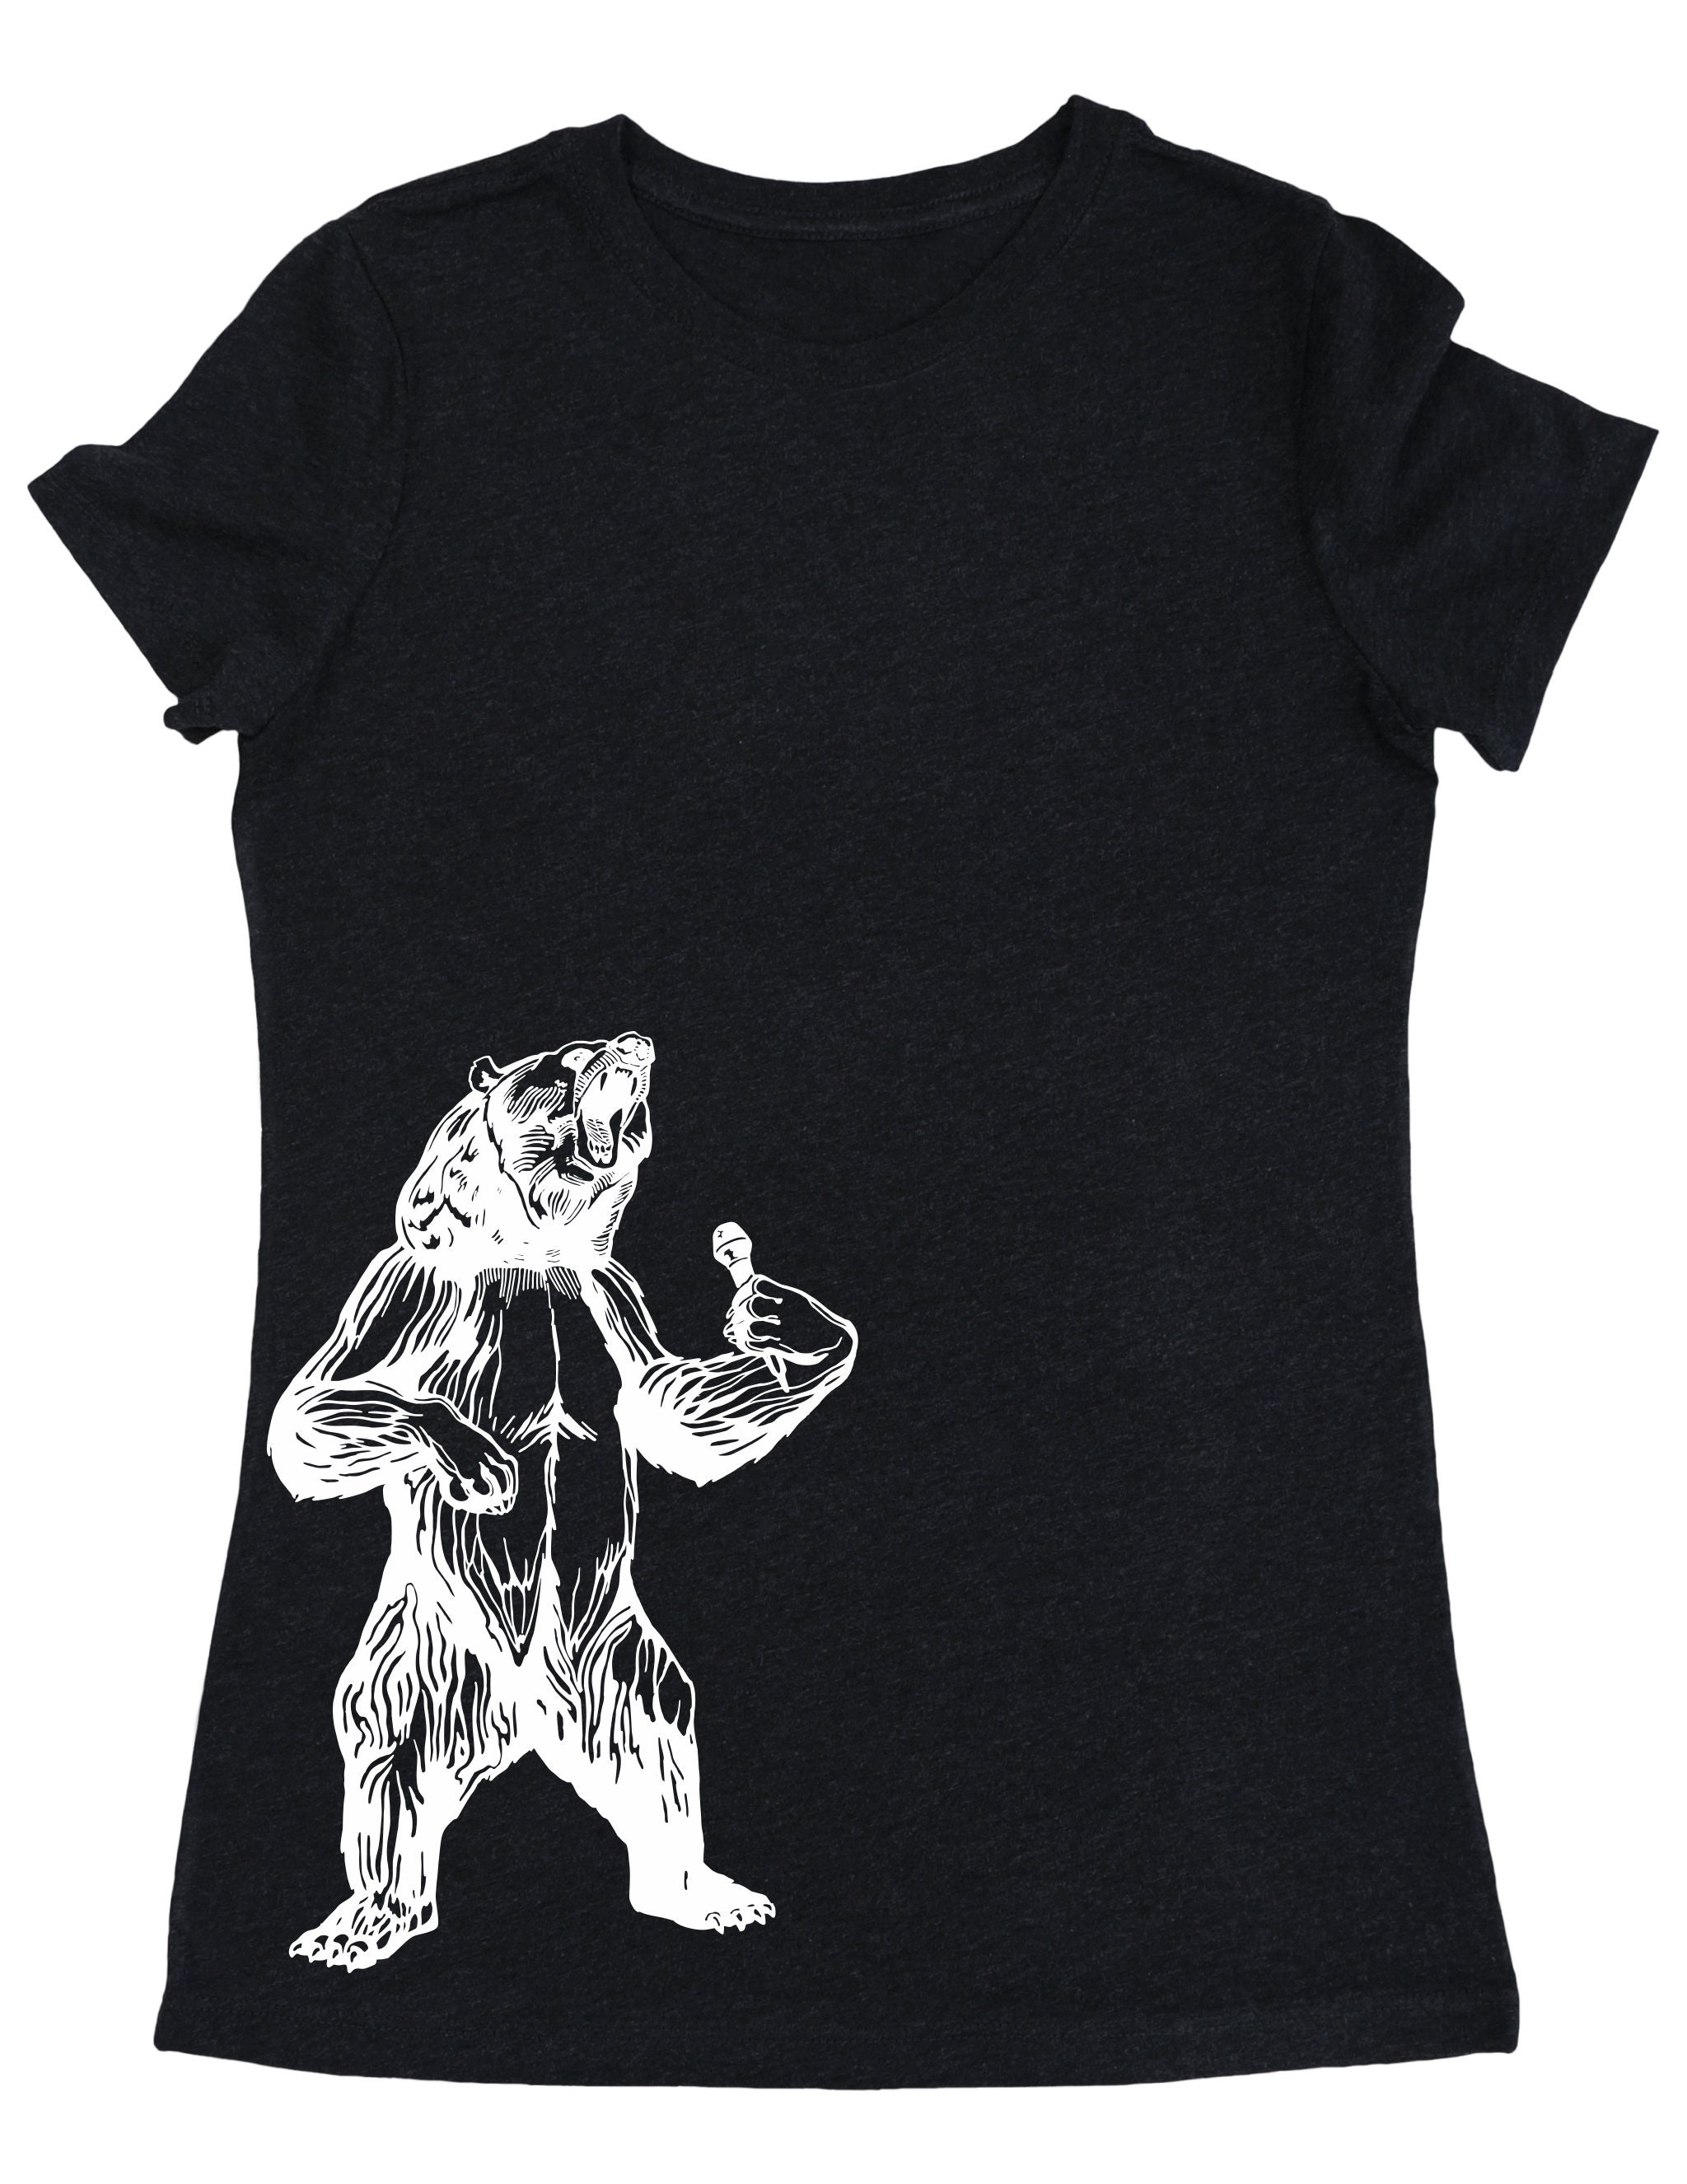 Bear Trying To Sing Women's Tri-Blend T-Shirt Gifts For Mom, Musician Girlfriend Gift, Wife Gift Birthday, Vocalist Her Seembo